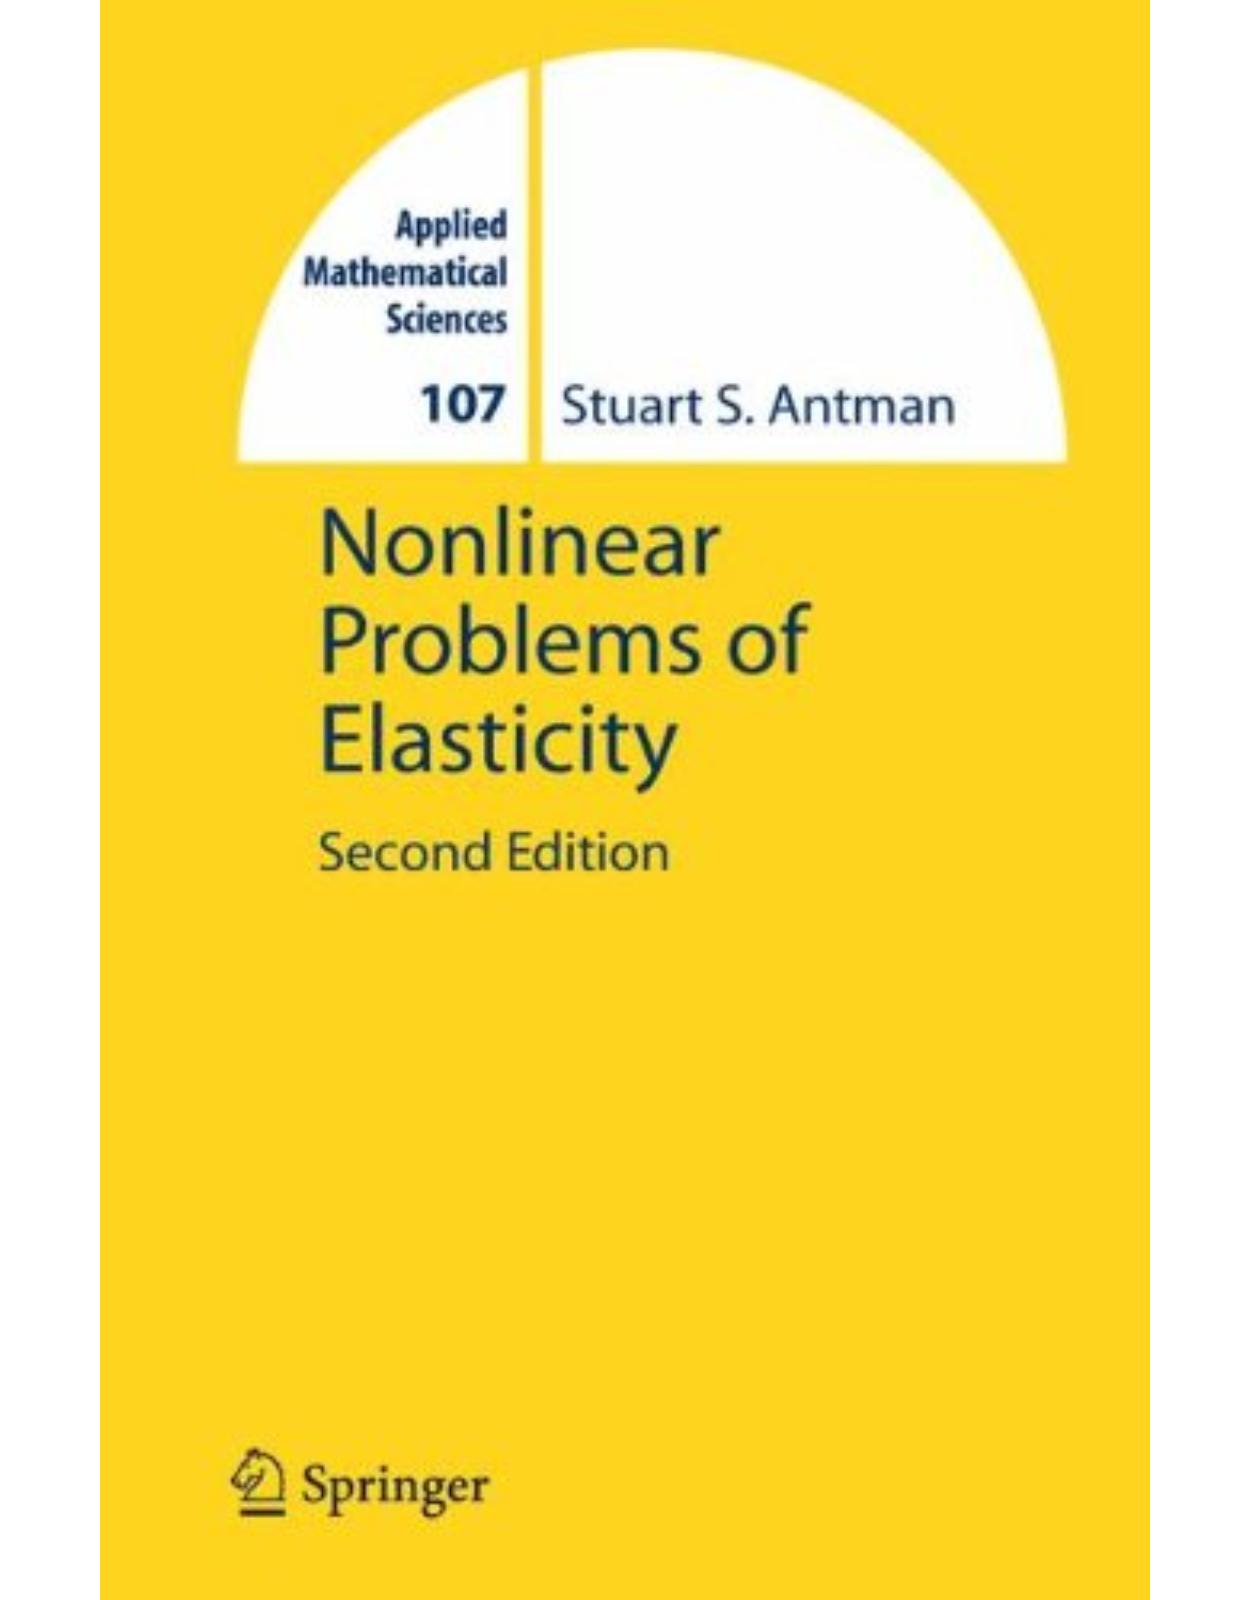 Nonlinear Problems of Elasticity (Applied Mathematical Sciences)